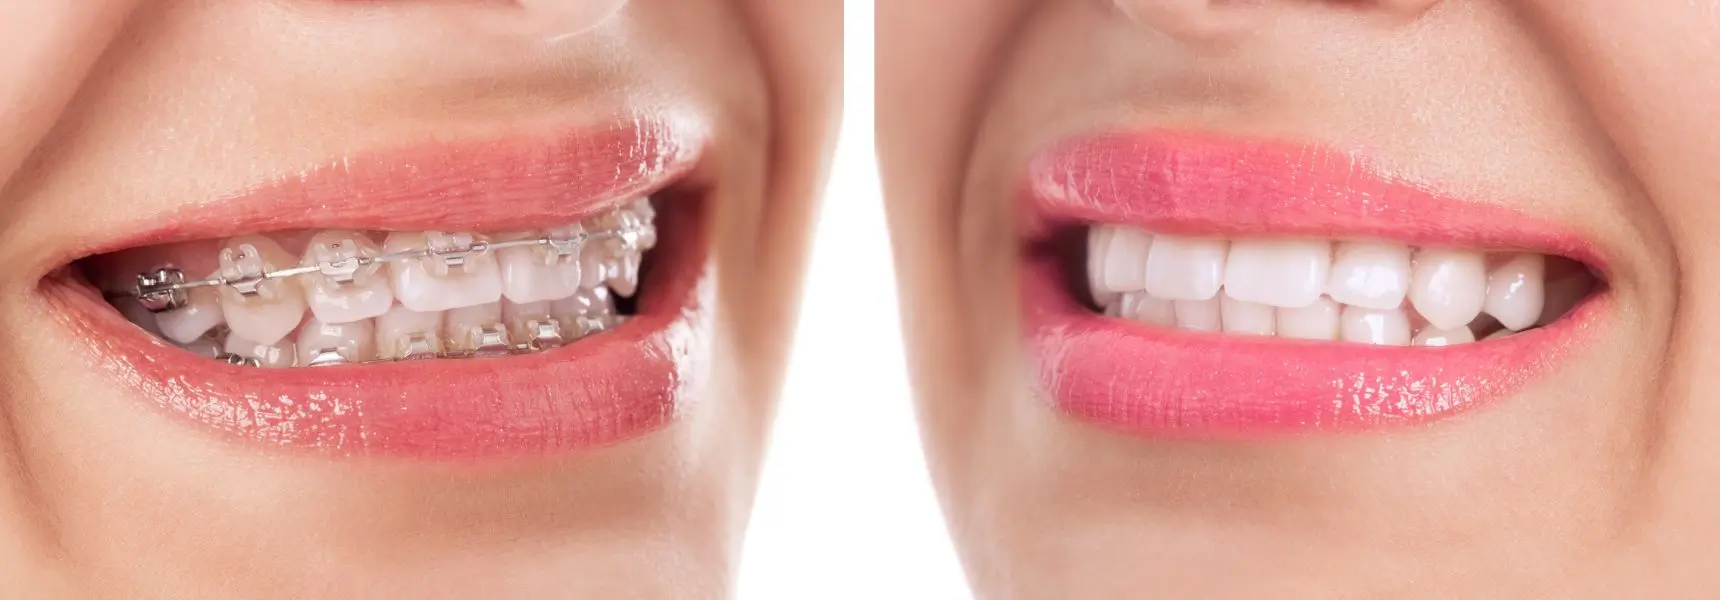 Before and after braces treatment photo